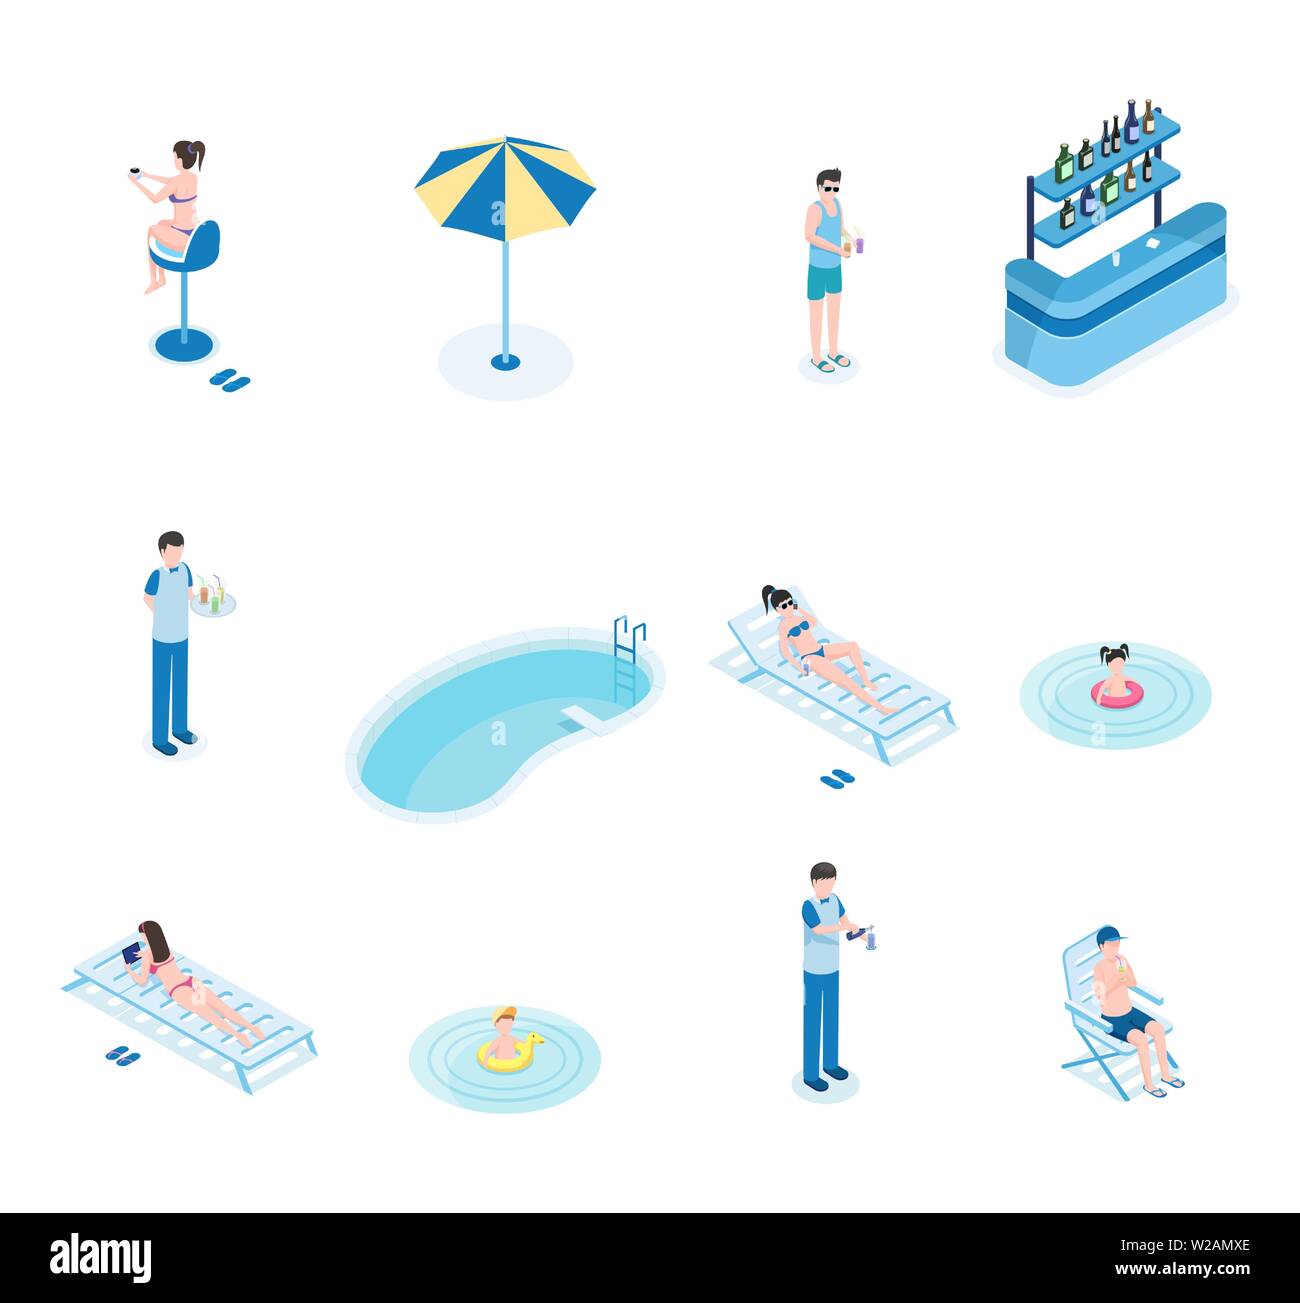 Summertime leisure isometric vector illustrations set. Tourists, bartender and waiter 3D cartoon characters. Women sunbathing on chaise lounges, man with cocktails, children swimming, empty pool Stock Vector